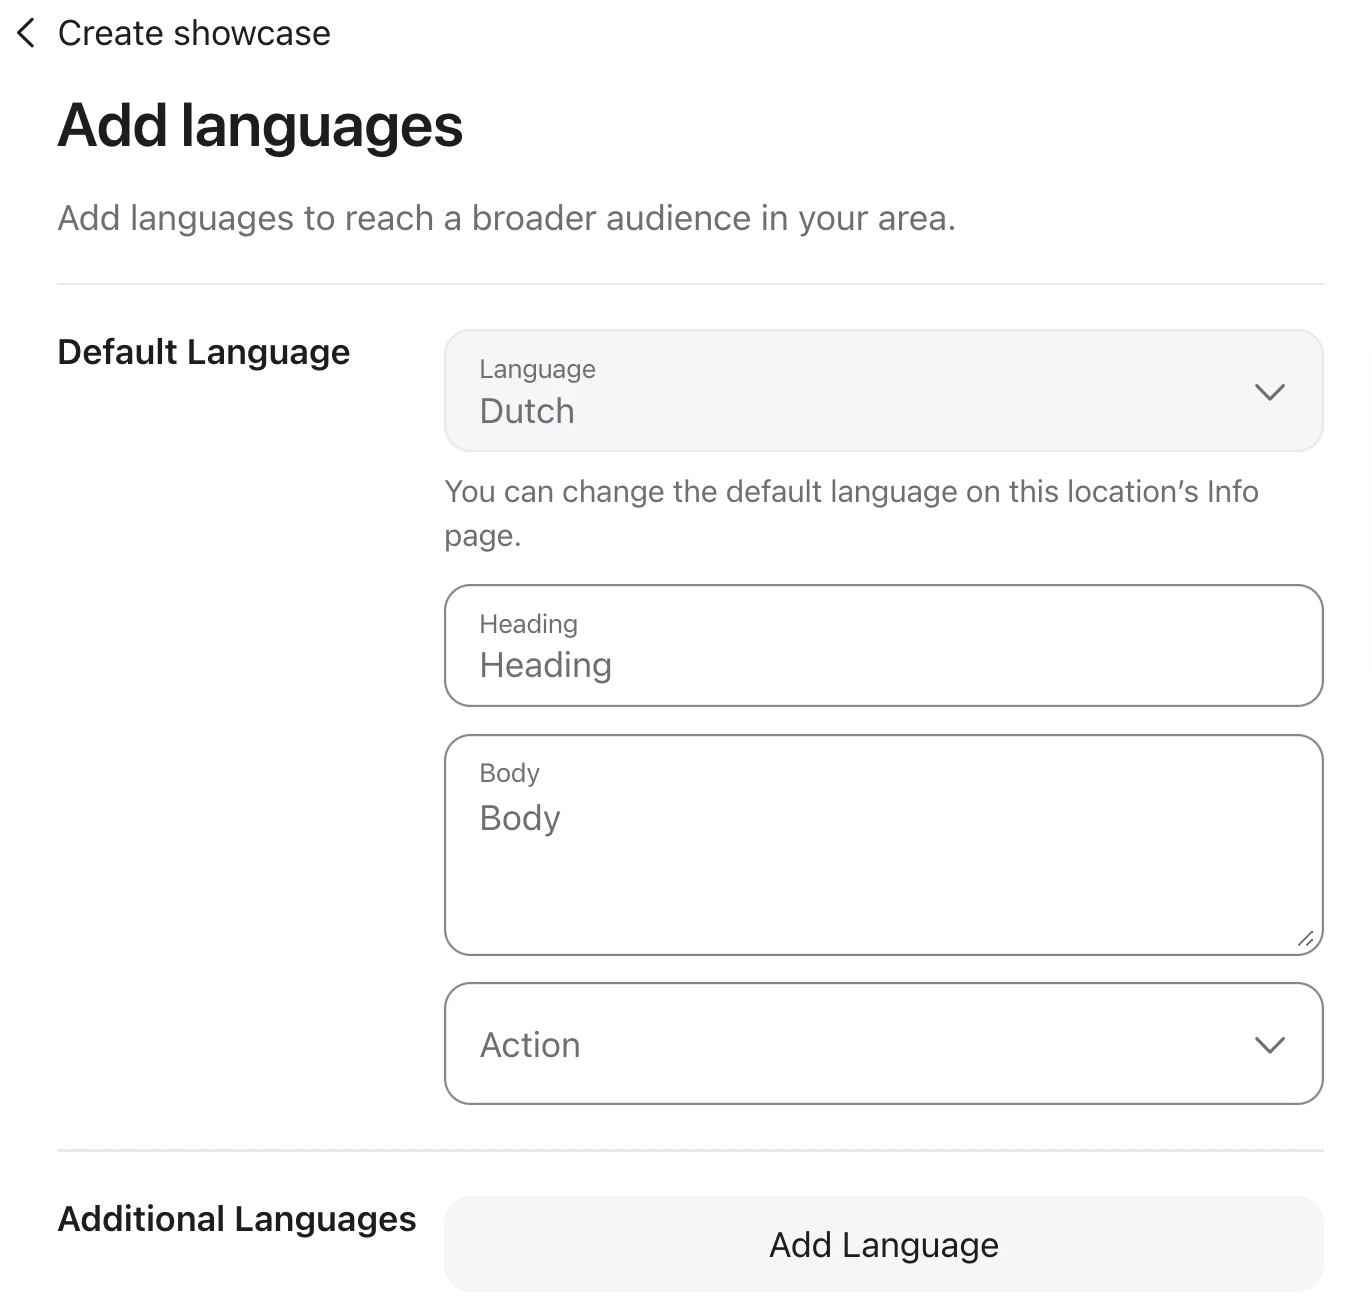 Apple Business Connect - Creating Showcase, Add Languages